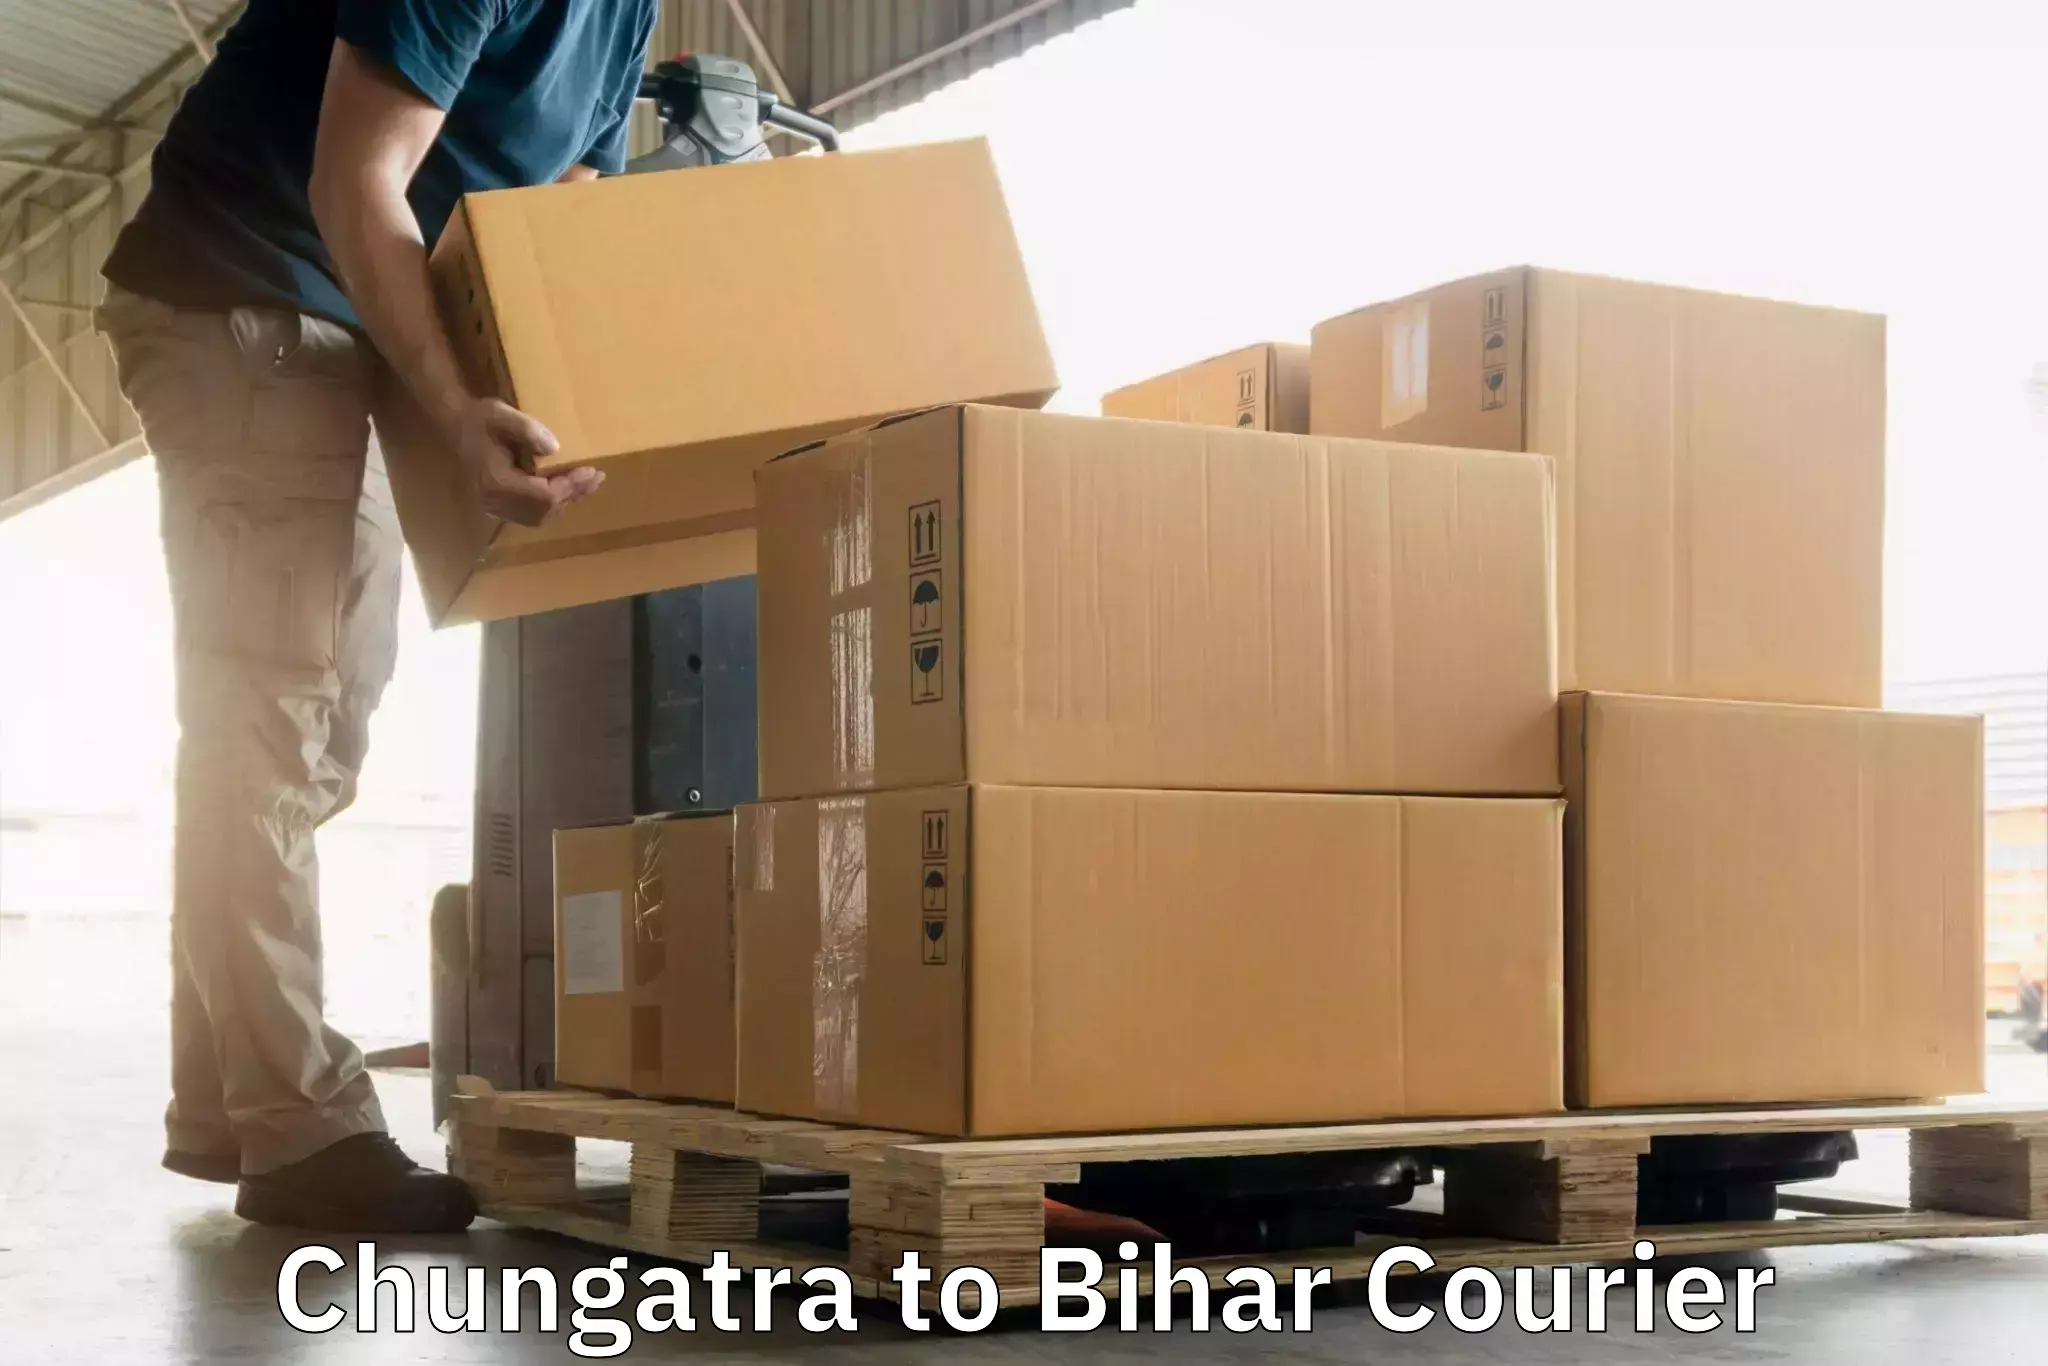 Fast delivery service Chungatra to Dighwara